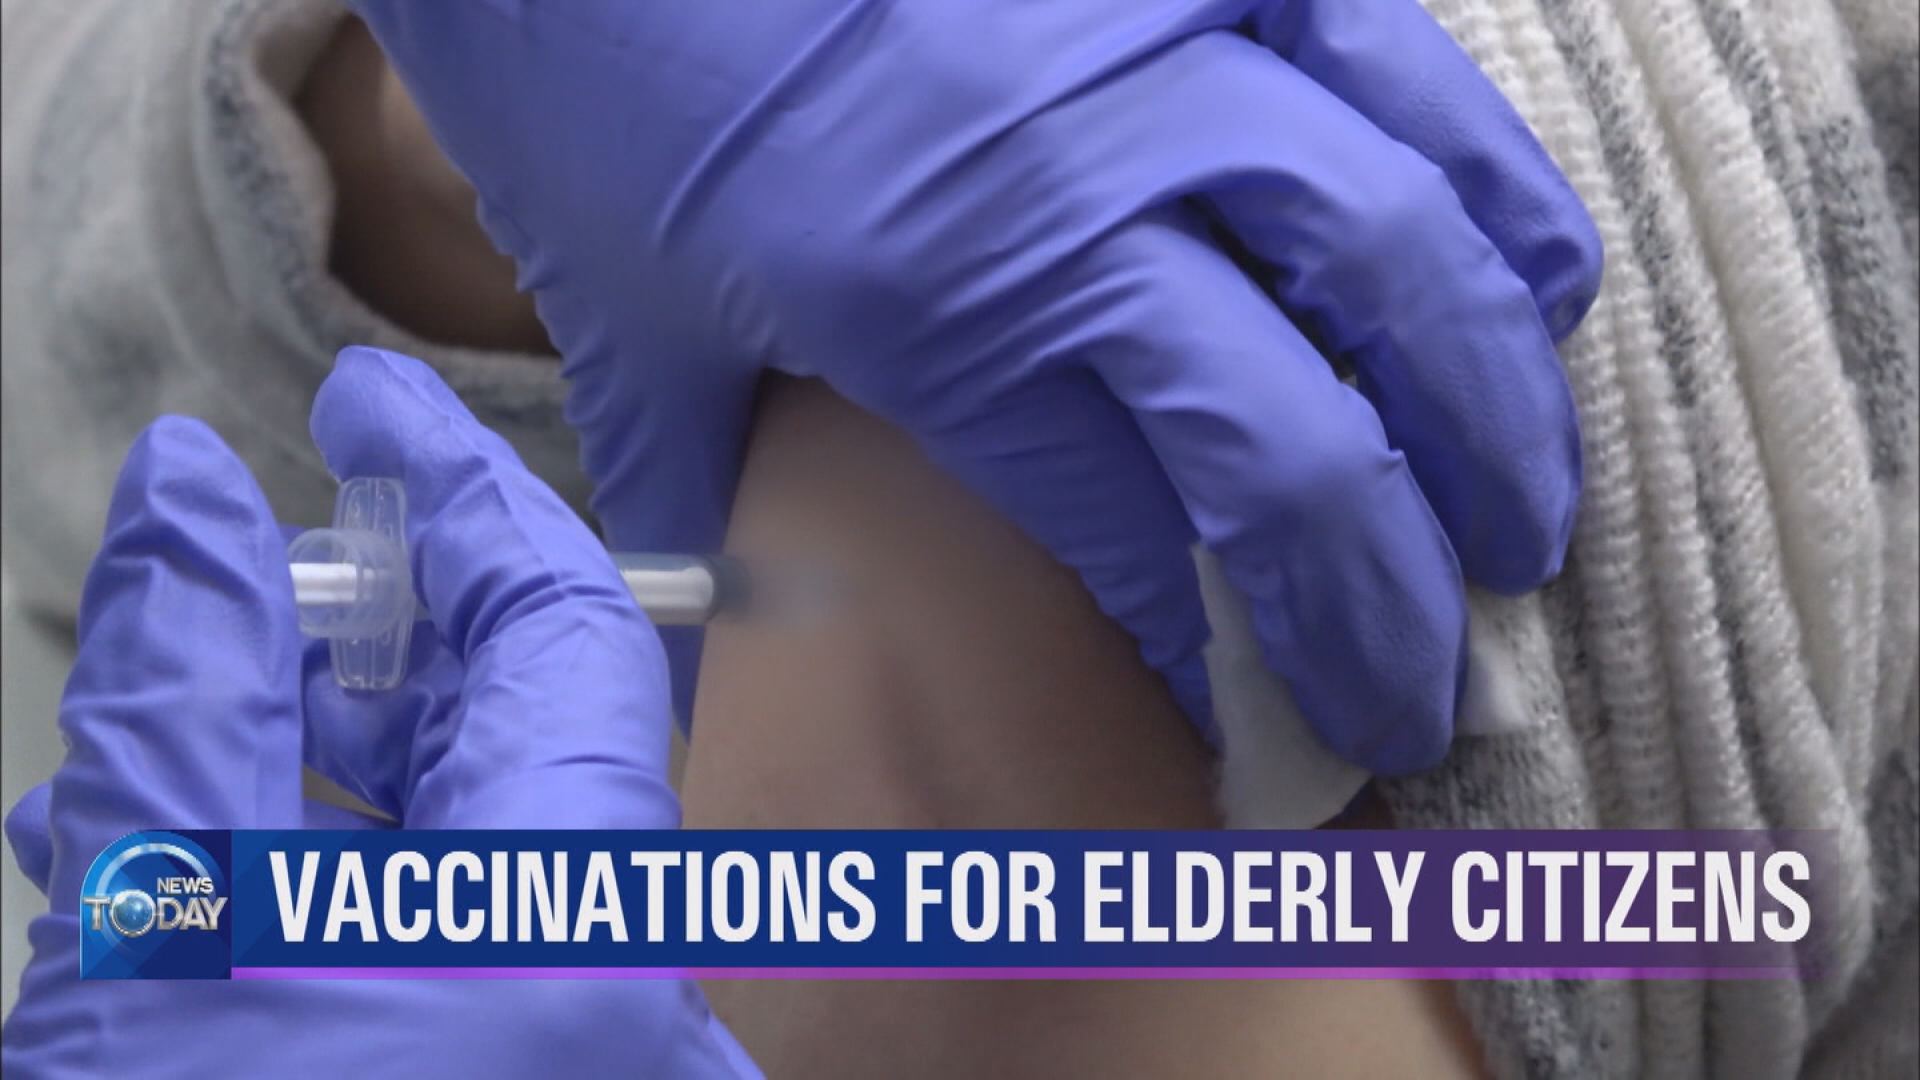 VACCINATIONS FOR ELDERLY CITIZENS